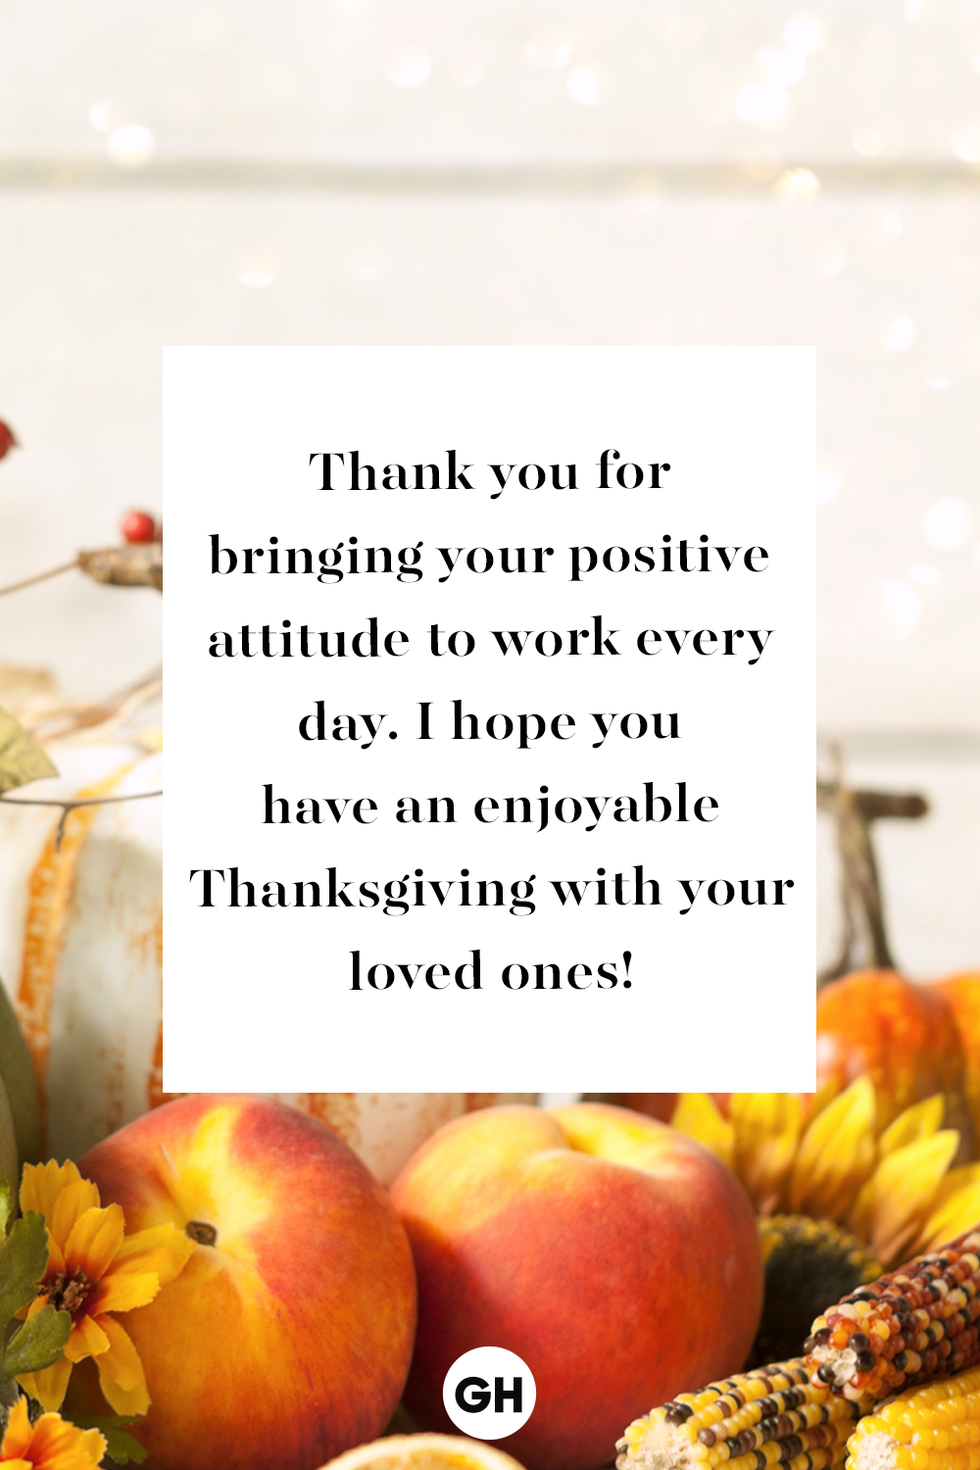 52 Best Thanksgiving Wishes and Messages for Friends & Family 2022